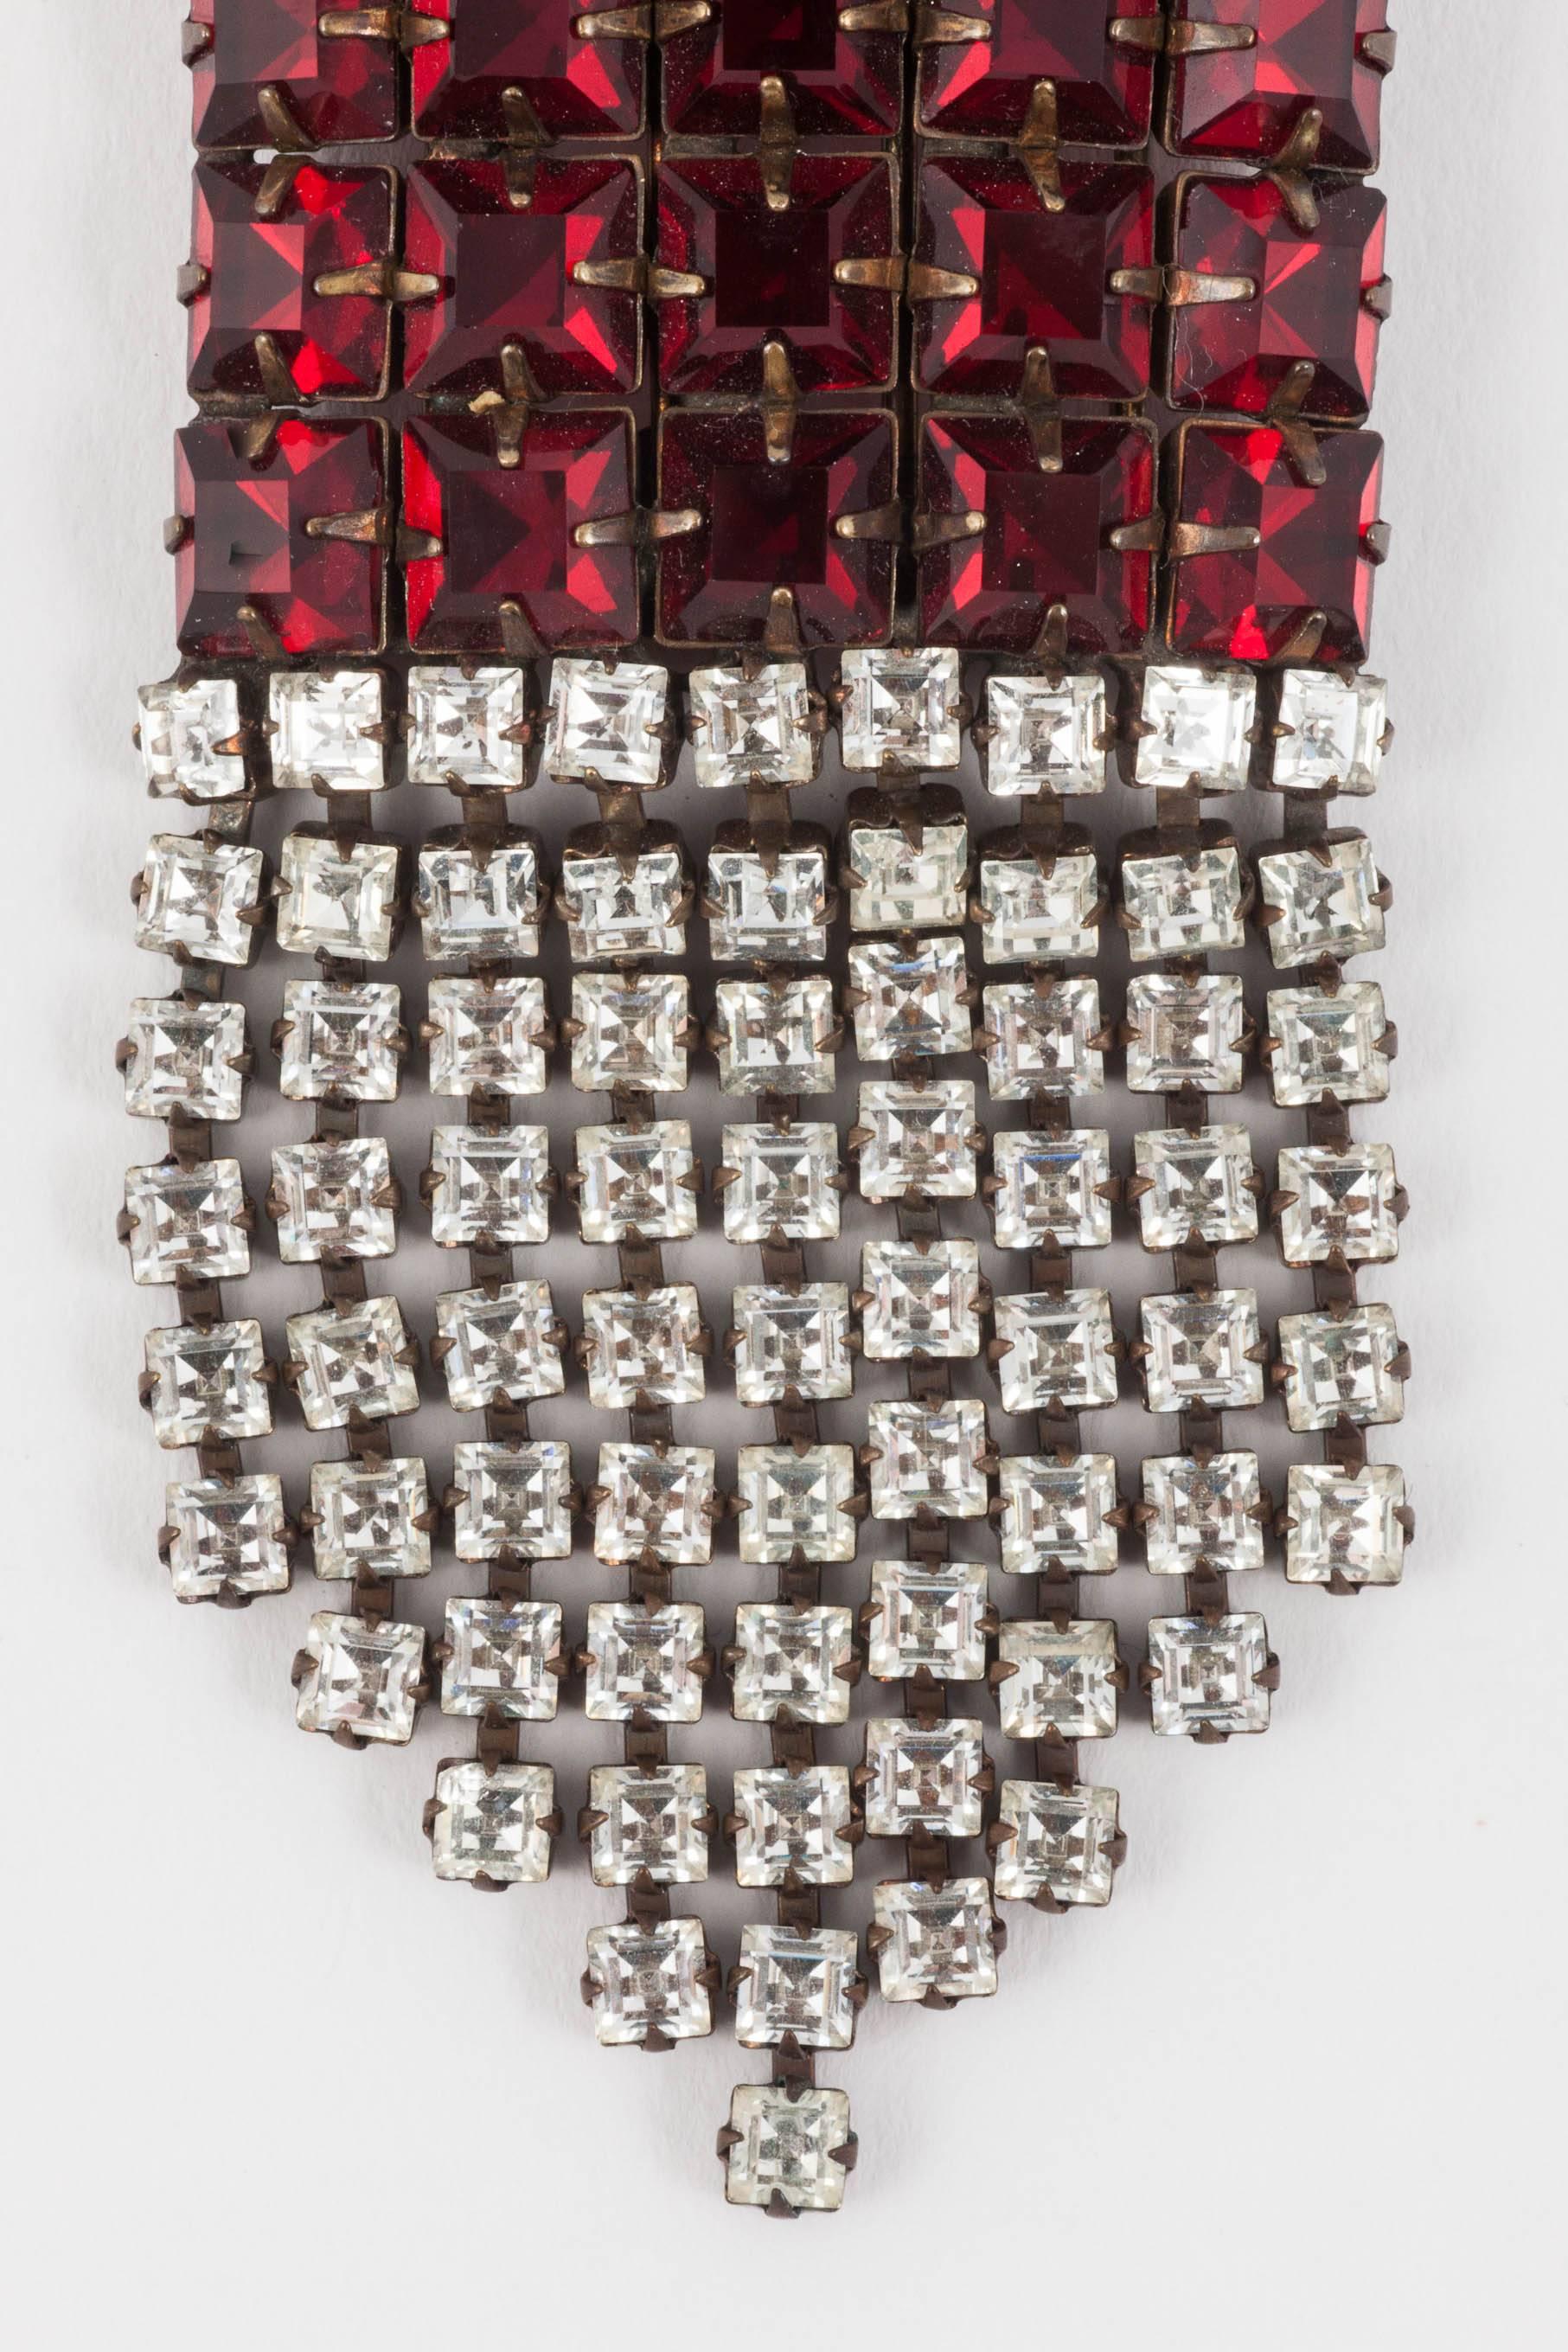 Unusually hand set on a dark copper mount, this wonderful brooch/pendant is very simple and very striking. The ruby coloured square stones are deeply bevelled almost making them like hobnail glass and creating a luscious shimmer. Stunning on a brave